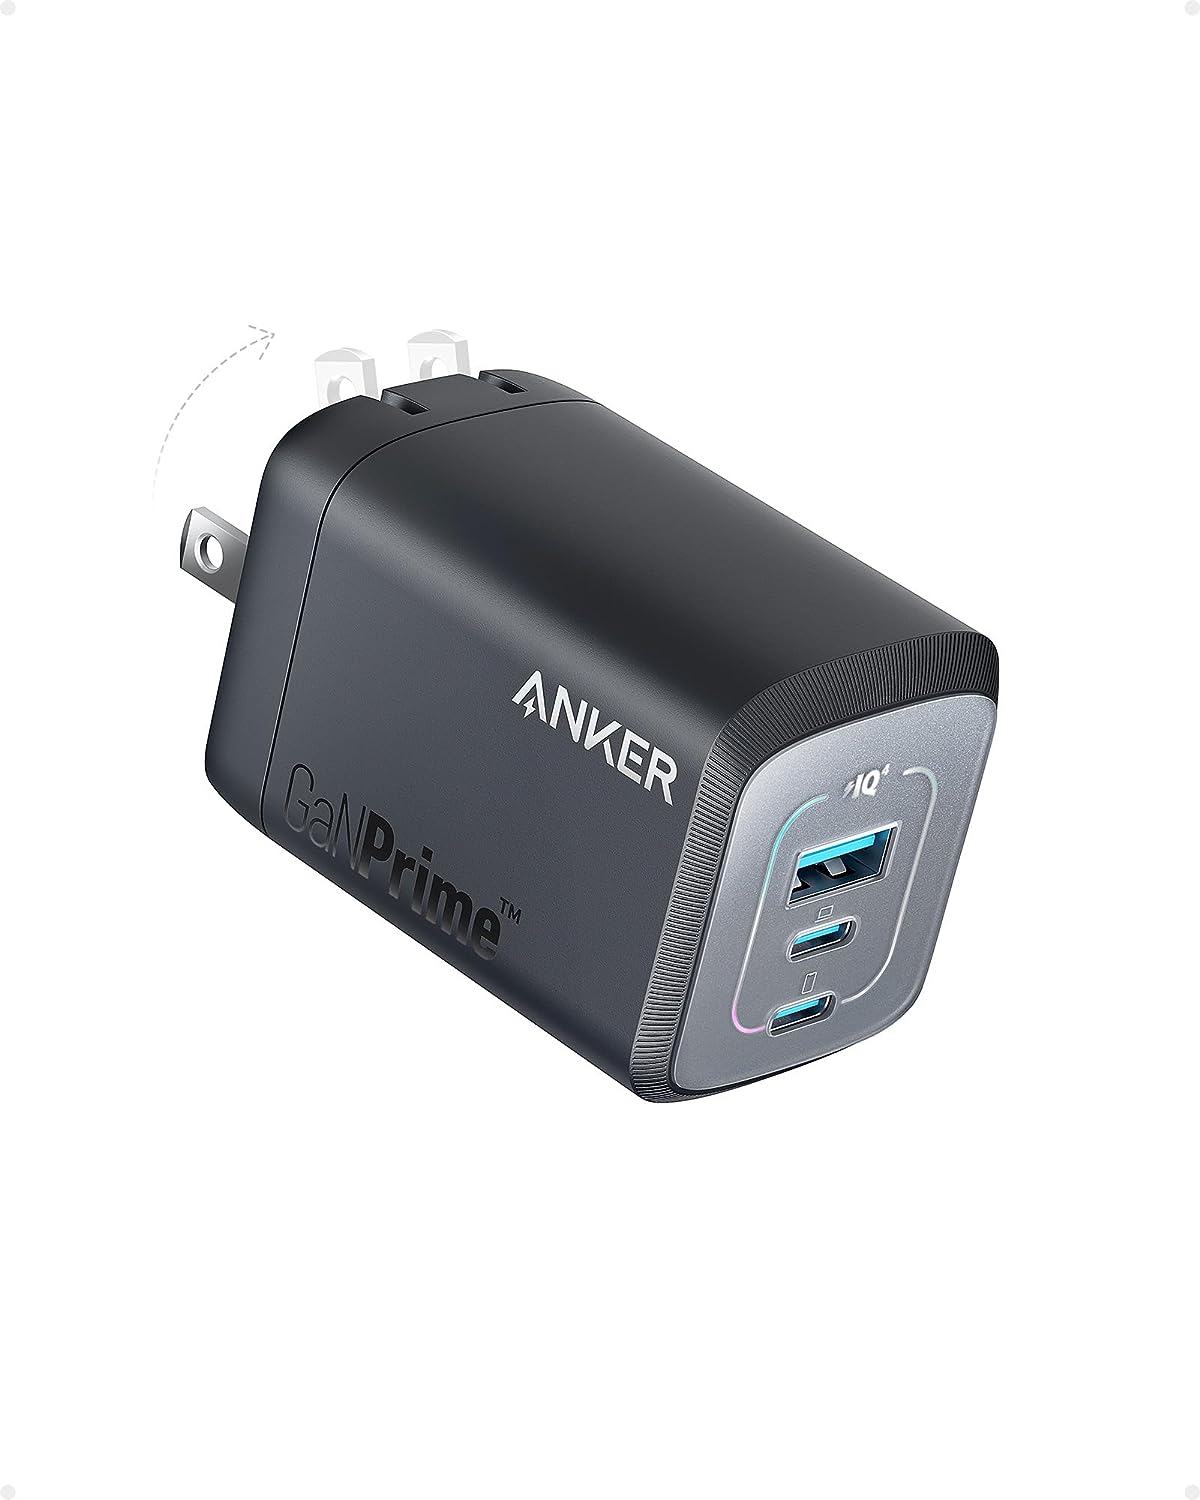 Anker Debuts New &#039;Prime Series&#039; High Speed Chargers and Power Banks